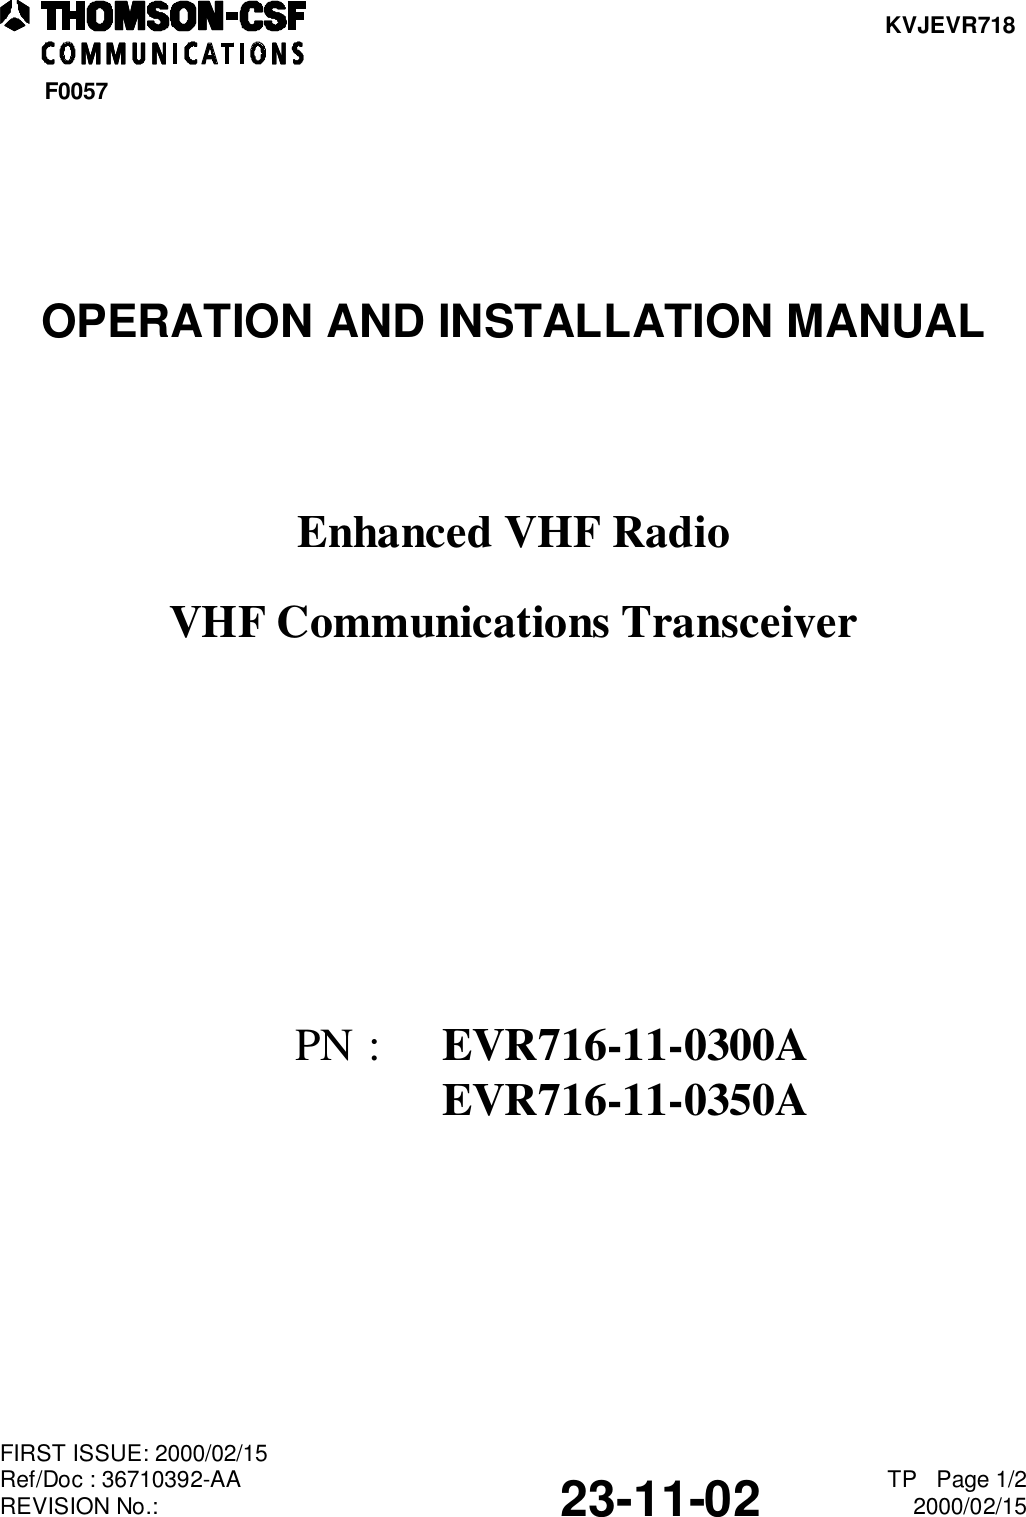 KVJEVR718F0057FIRST ISSUE: 2000/02/15Ref/Doc : 36710392-AAREVISION No.: 23-11-02 TP   Page 1/22000/02/15OPERATION AND INSTALLATION MANUALEnhanced VHF RadioVHF Communications TransceiverPN : EVR716-11-0300AEVR716-11-0350A